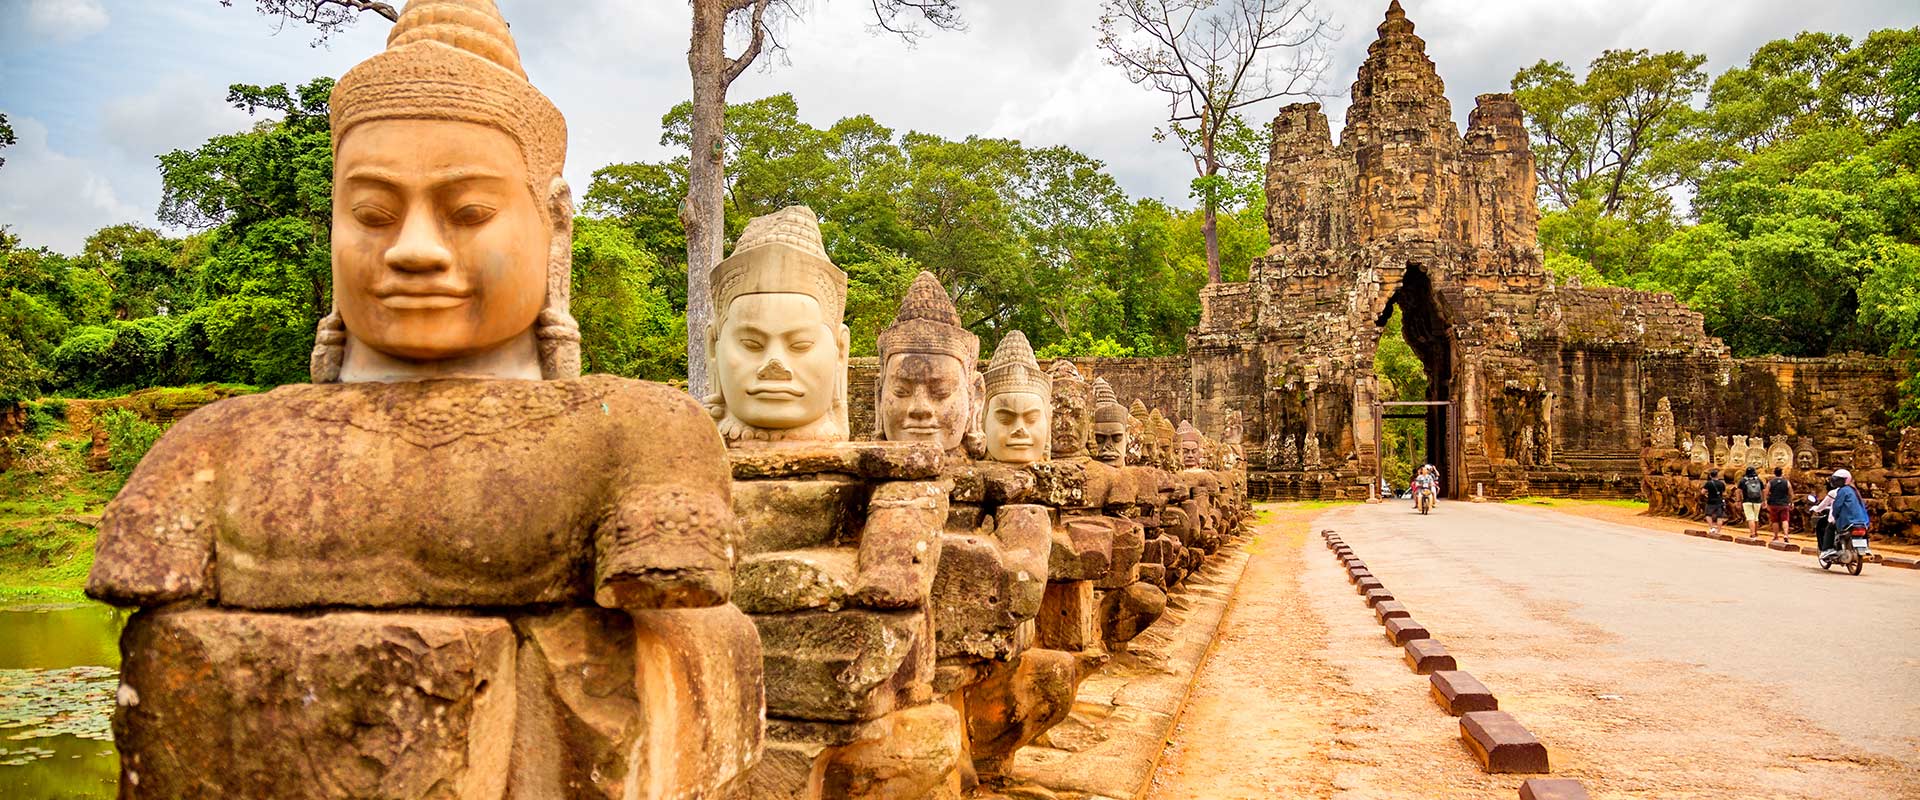 Row of carved men statues at the main gates to a stone temple, Cambodia